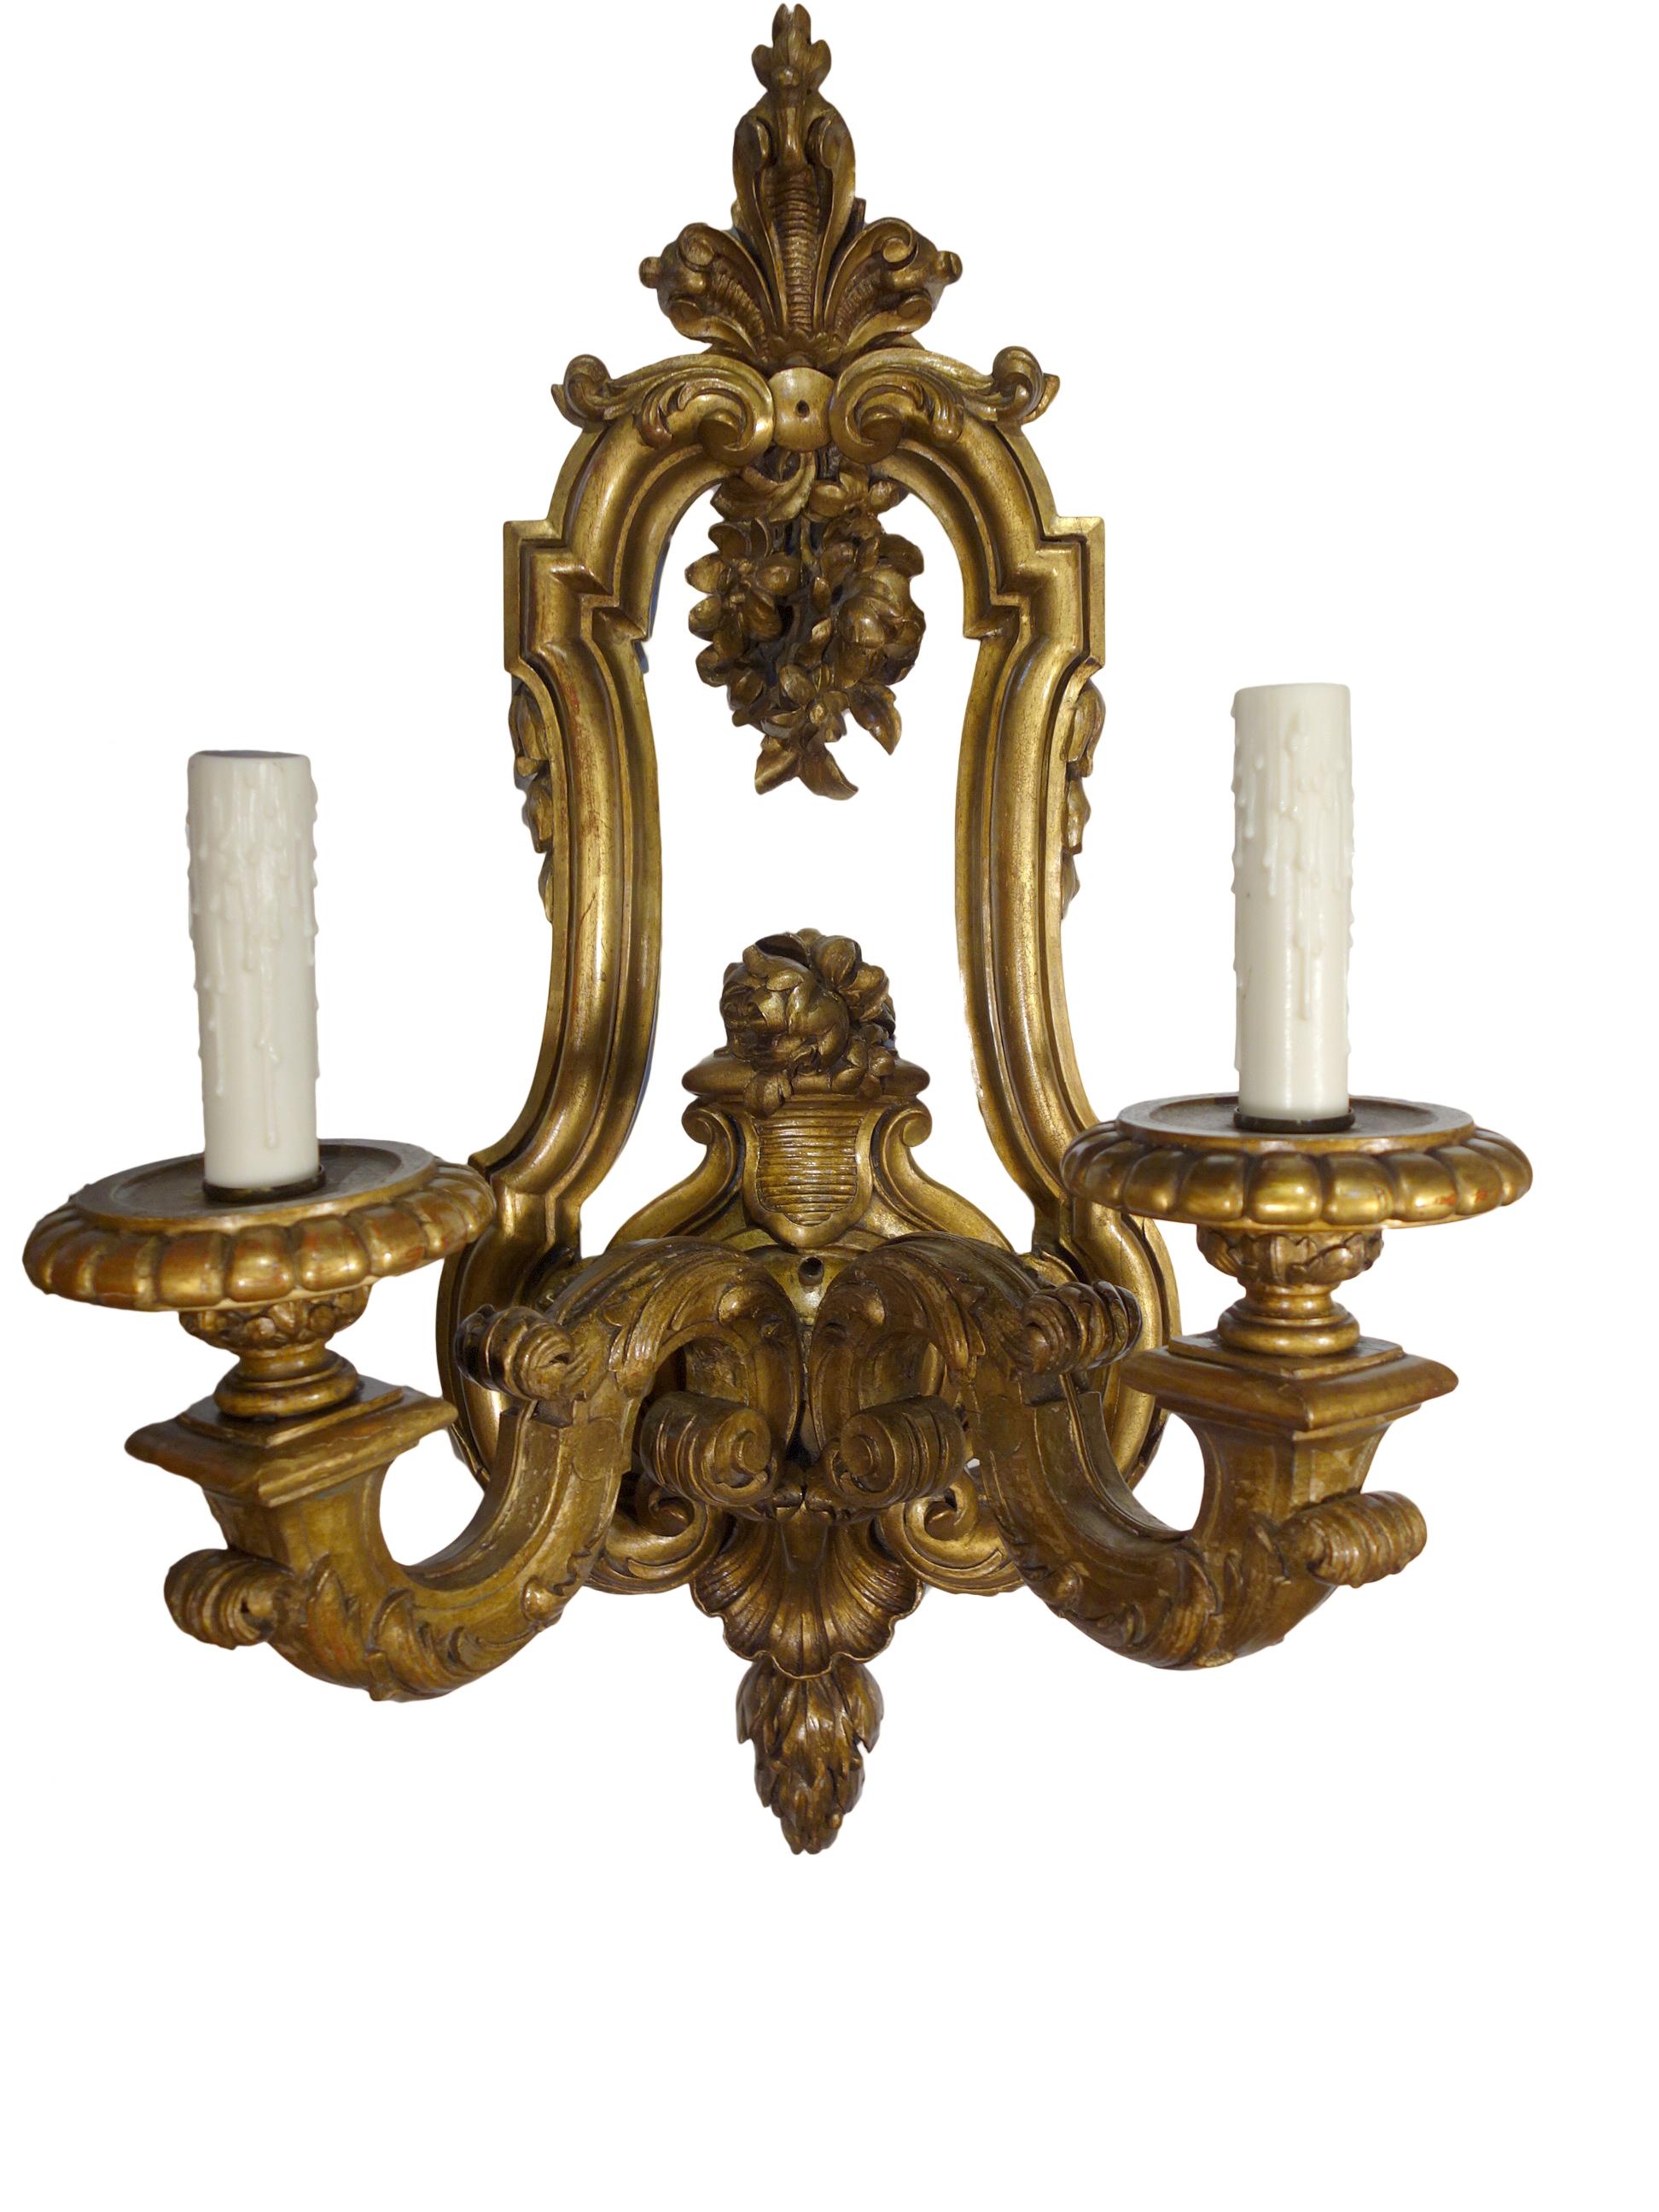 Louis XIV Baroque style giltwood 2-light sconce pair. Fine Italian reproduction, grande scale,  these sconce pieces are hand carved and ornately detailed, circa 1930. Professionally rewired and restored, standard base bulb sockets. Sotheby's New